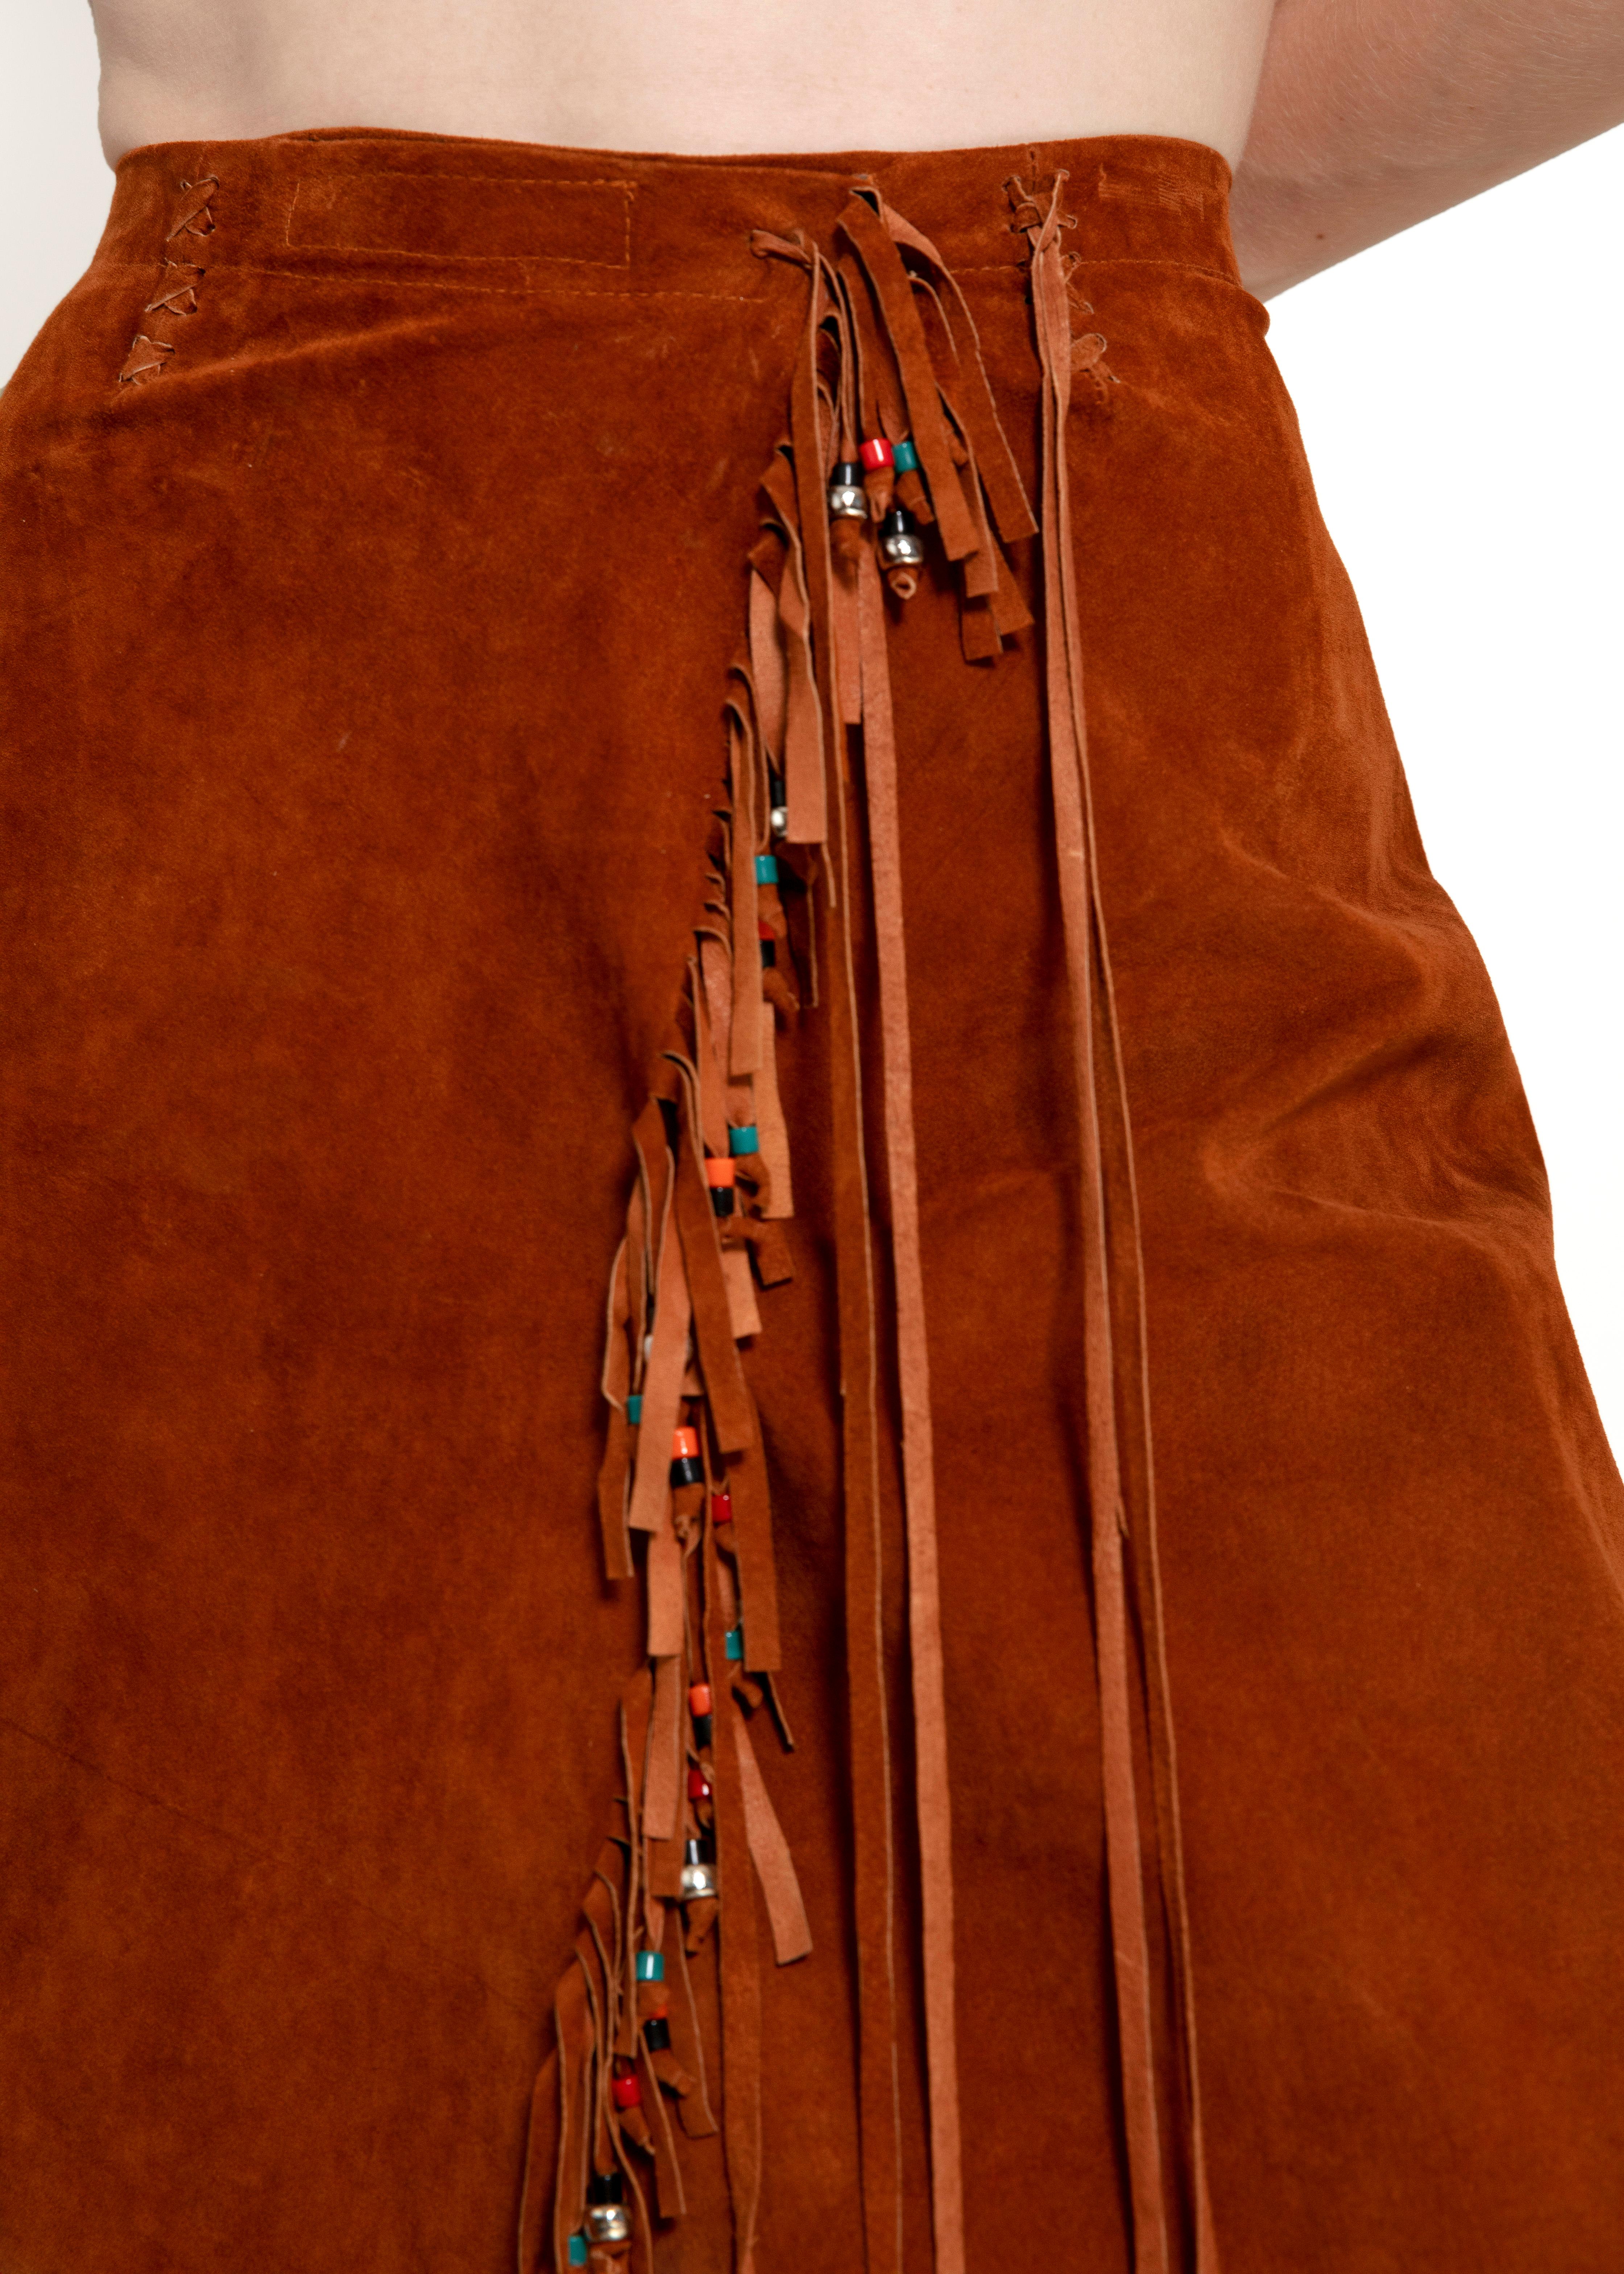 Pia Rucci Leather Fringe skirt In Excellent Condition For Sale In Los Angeles, CA